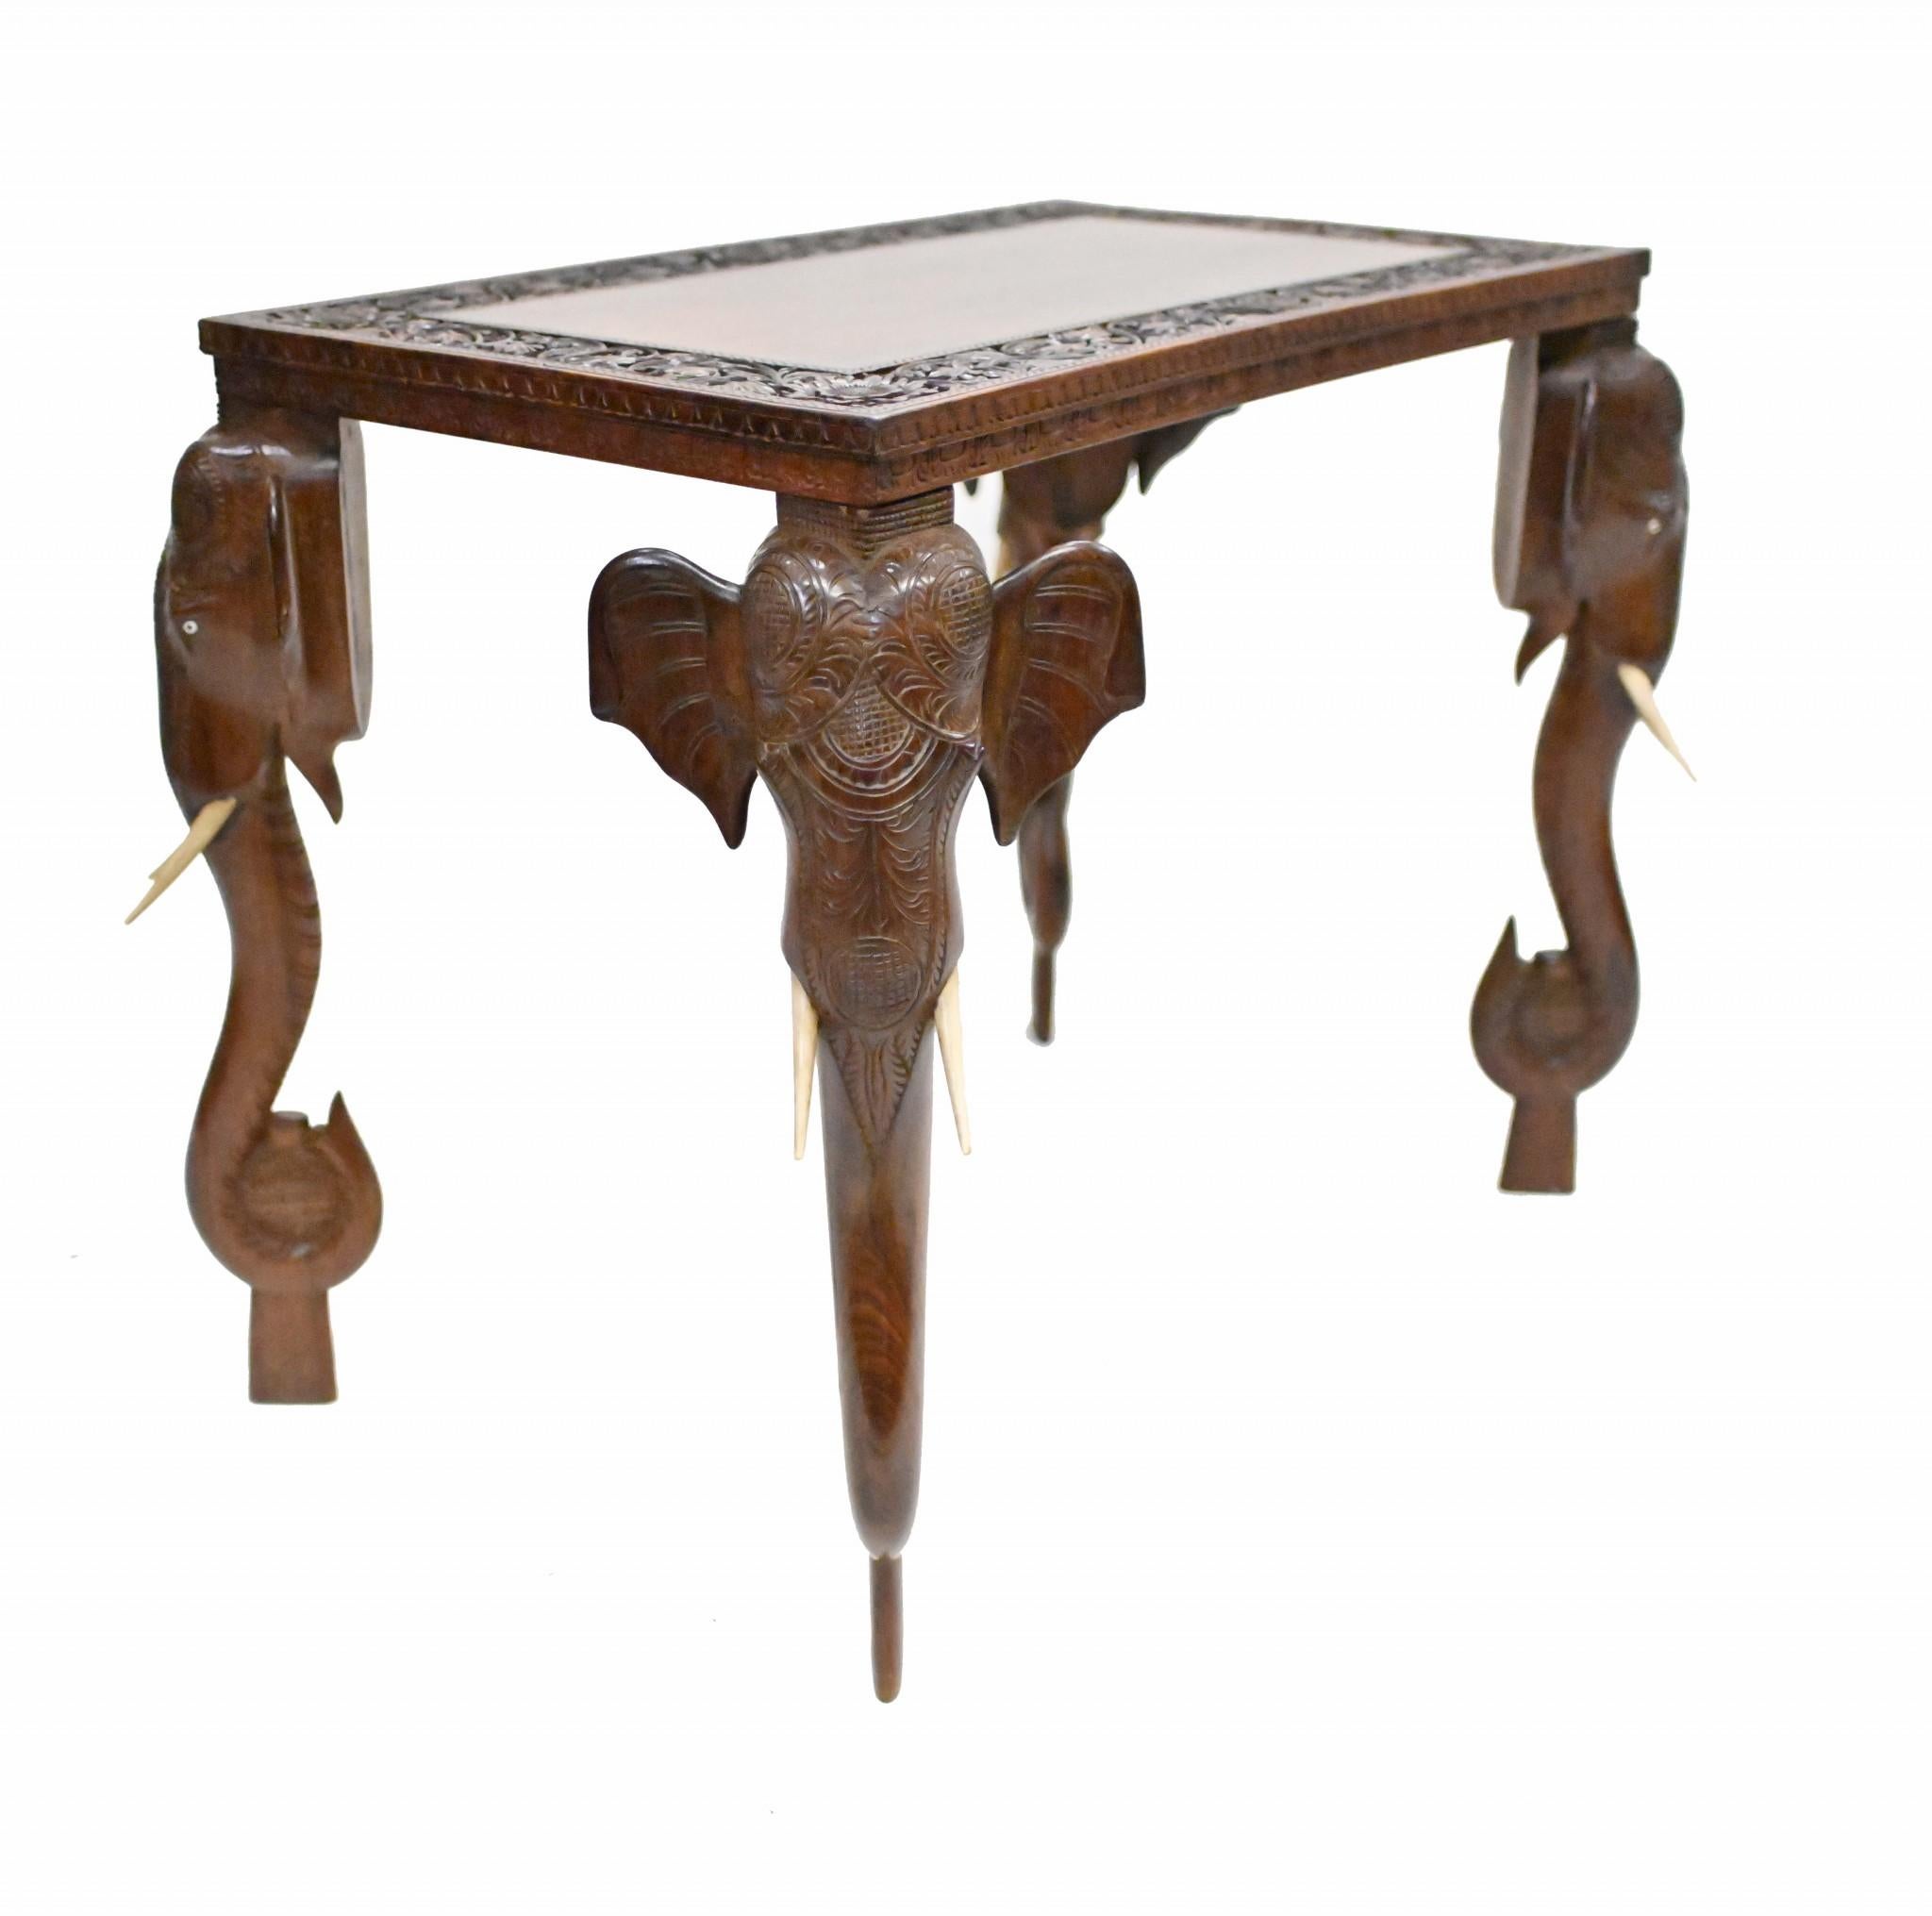 Teak Indian Side Table Colonial Antiques Elephant Legs 1840